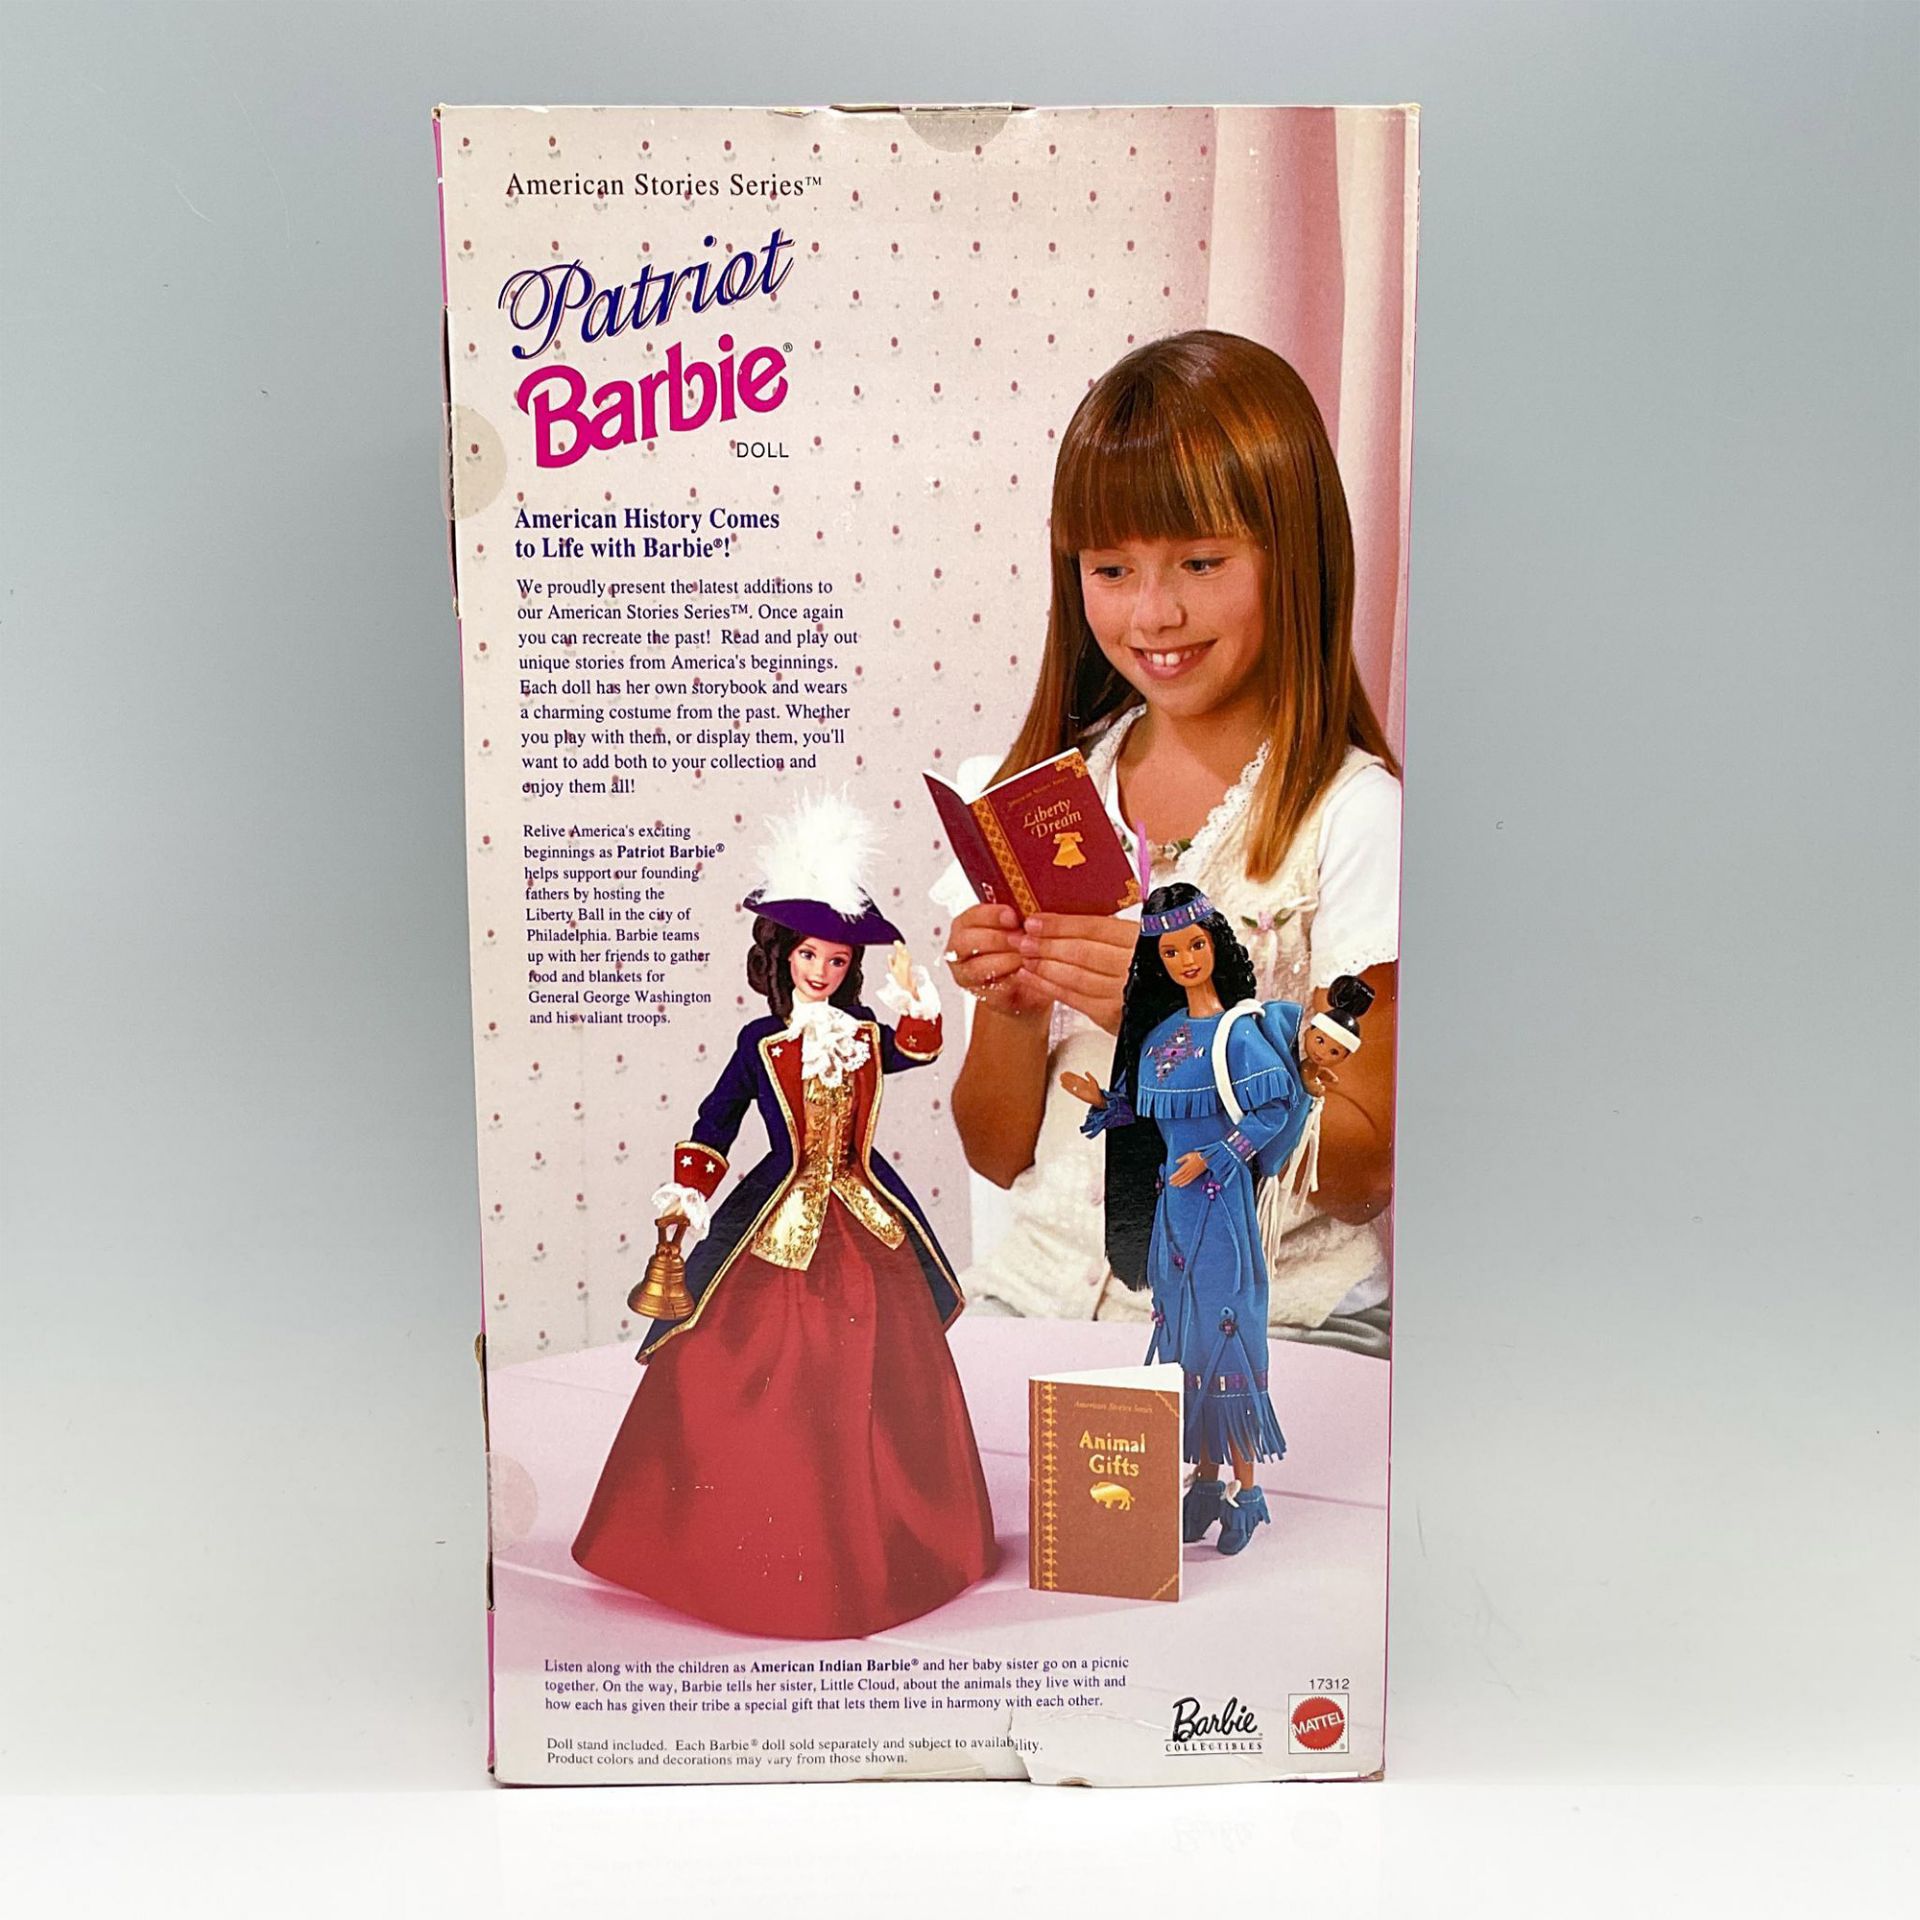 Mattel Patriot Barbie Doll Collector Edition, New in Box - Image 2 of 3